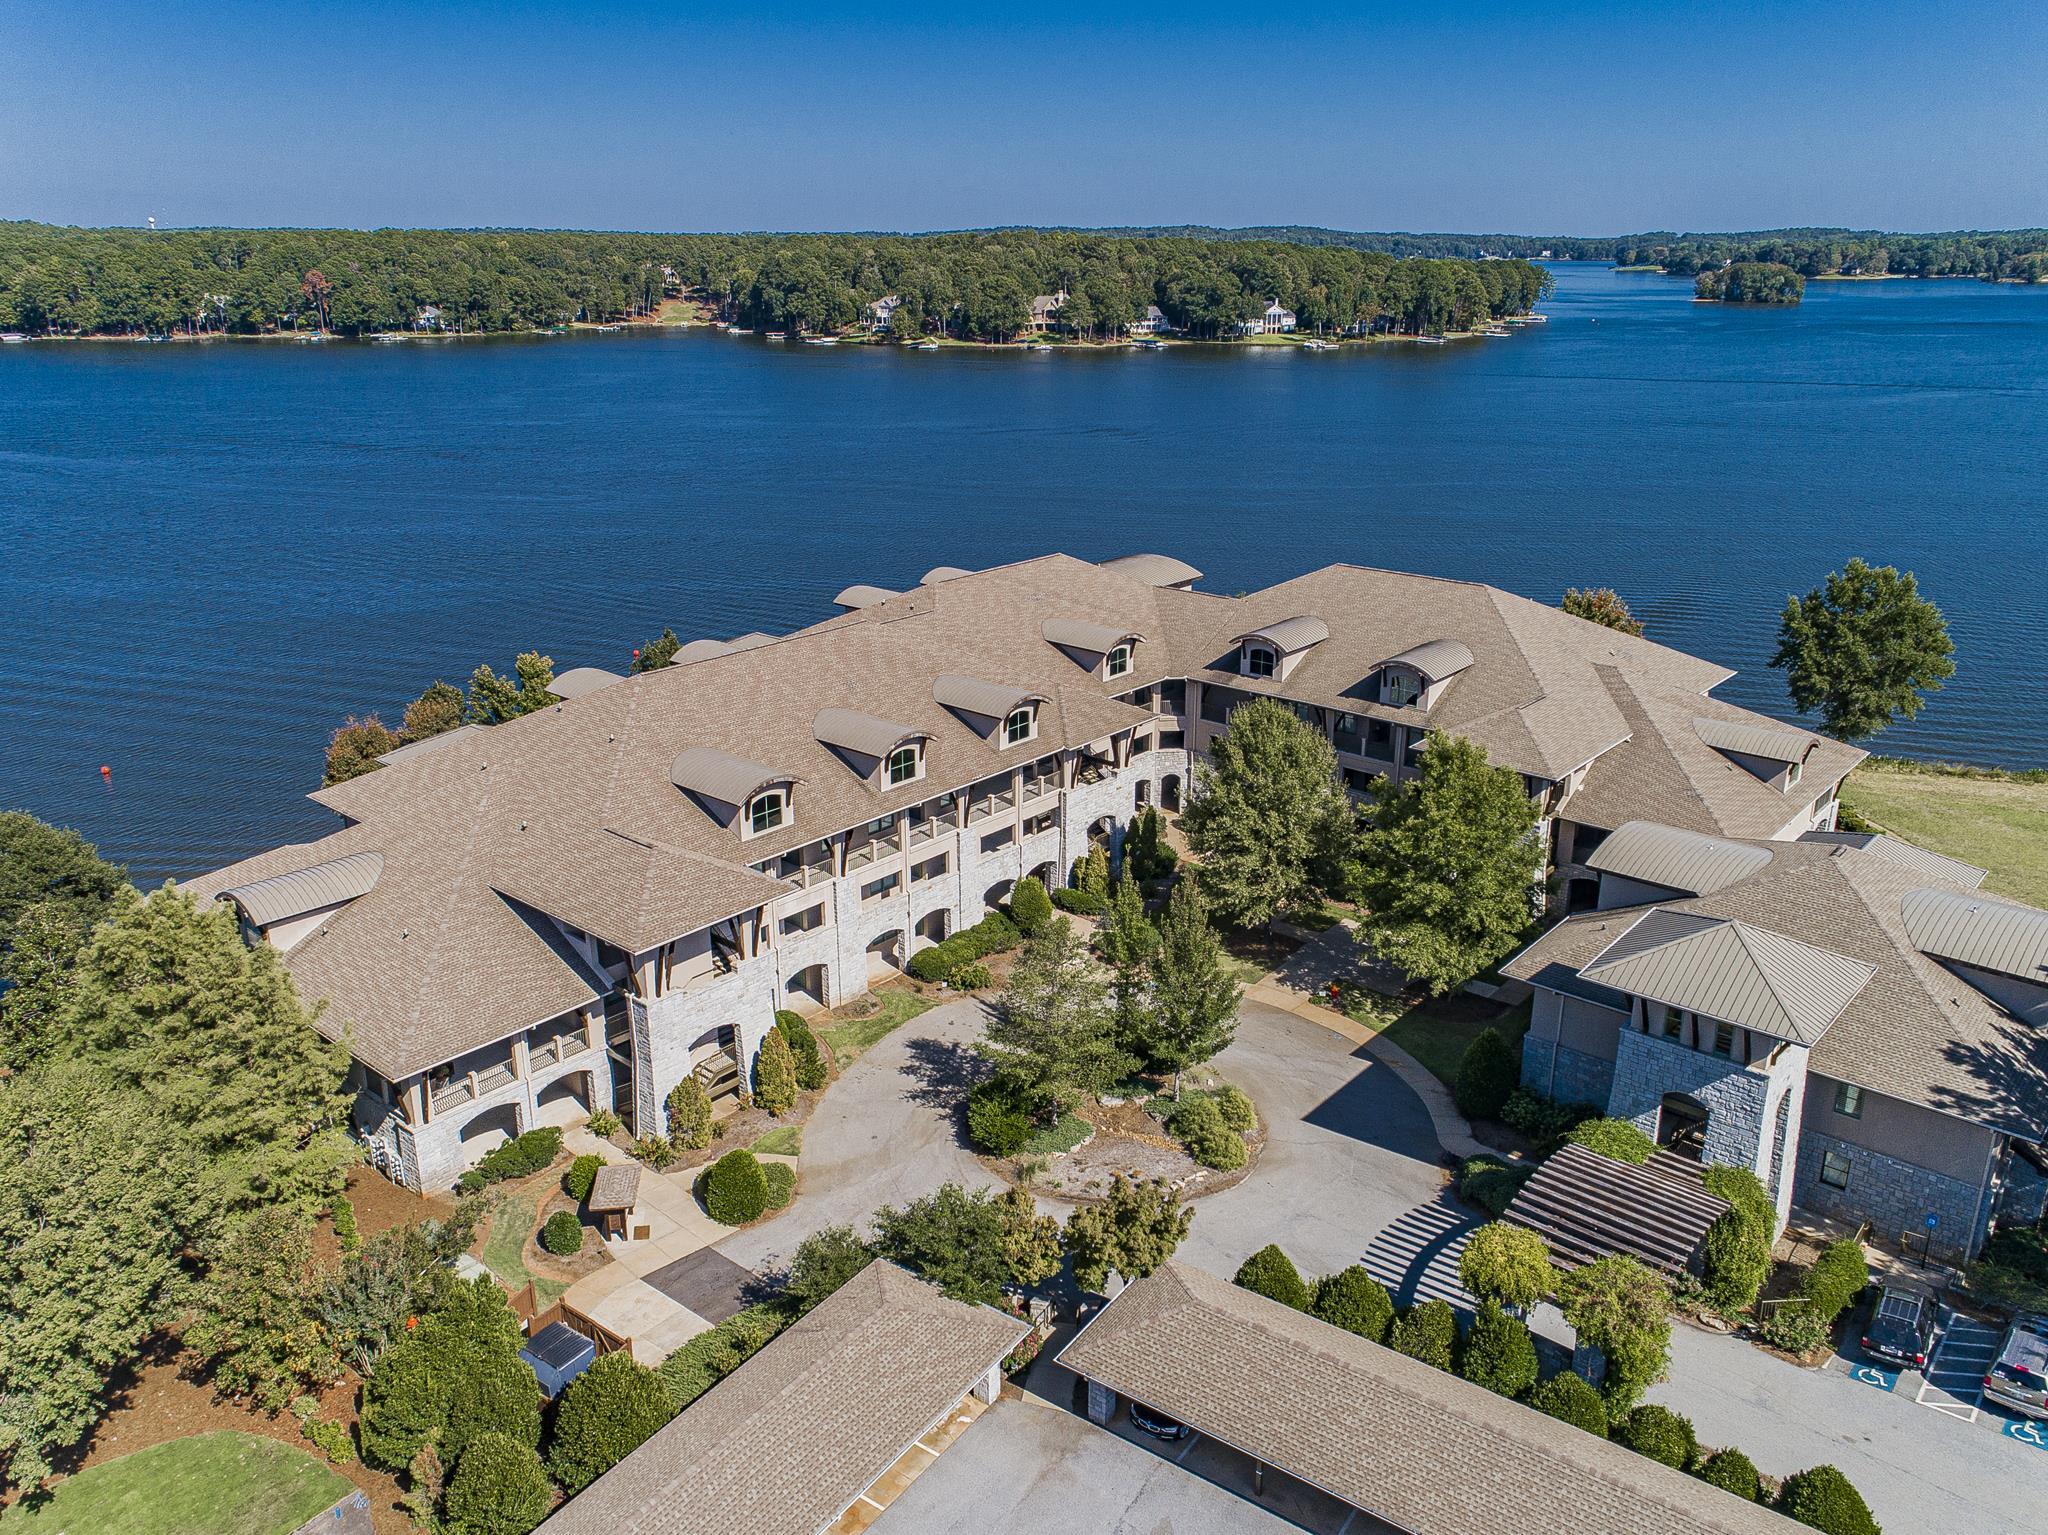 Easy Waterfront Living in Cuscowilla on Lake Oconee.  Enjoy true lock-and-leave convenience in this 3BR/3BA move-in ready lake front condo home in Sojourn.  Open floor plan with main lake views. Exceptionally maintained and updated unit. Wonderful Sojourn exclusive amenities, including:  Docks, Lakeside Sandy Beach, and Pavilion with Outdoor Kitchen overlooking Lake Oconee. Cuscowilla offers world-class amenities-- Lake Oconee’s only links-style course, brand new Clubhouse, restaurant, 2 pools, tennis, community garden, and more.  Sold partially furnished! Call today.